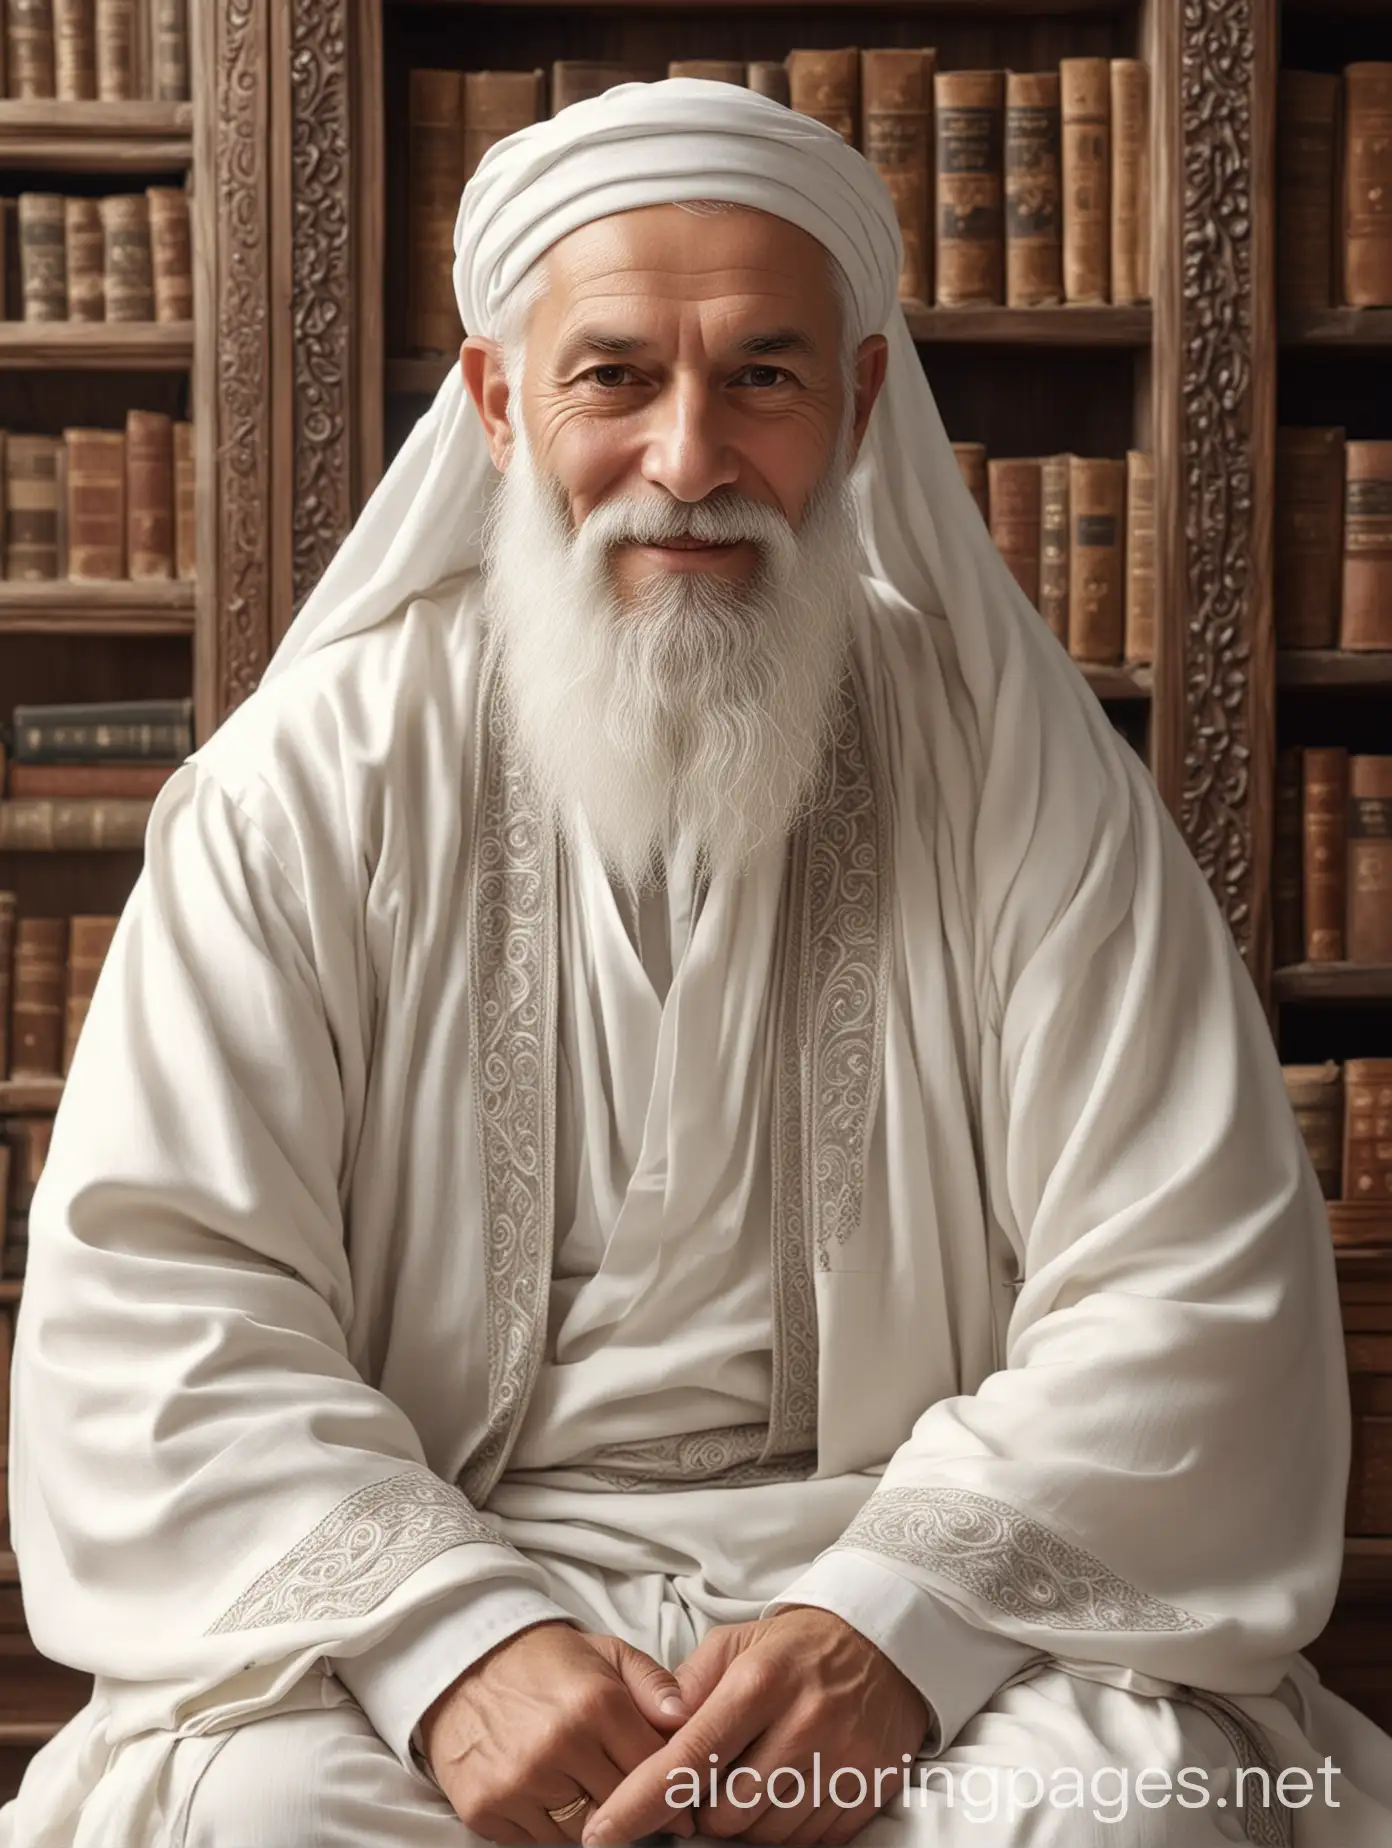 A wise middle-aged man from the Islamic era, with white skin and a long thick white beard, staring at the lens, smiling lightly, sitting in an old library, dressed in beautiful white clothes, very realistic, 4K, vintage, so that the whole body is visible. , Coloring Page, black and white, line art, white background, Simplicity, Ample White Space. The background of the coloring page is plain white to make it easy for young children to color within the lines. The outlines of all the subjects are easy to distinguish, making it simple for kids to color without too much difficulty